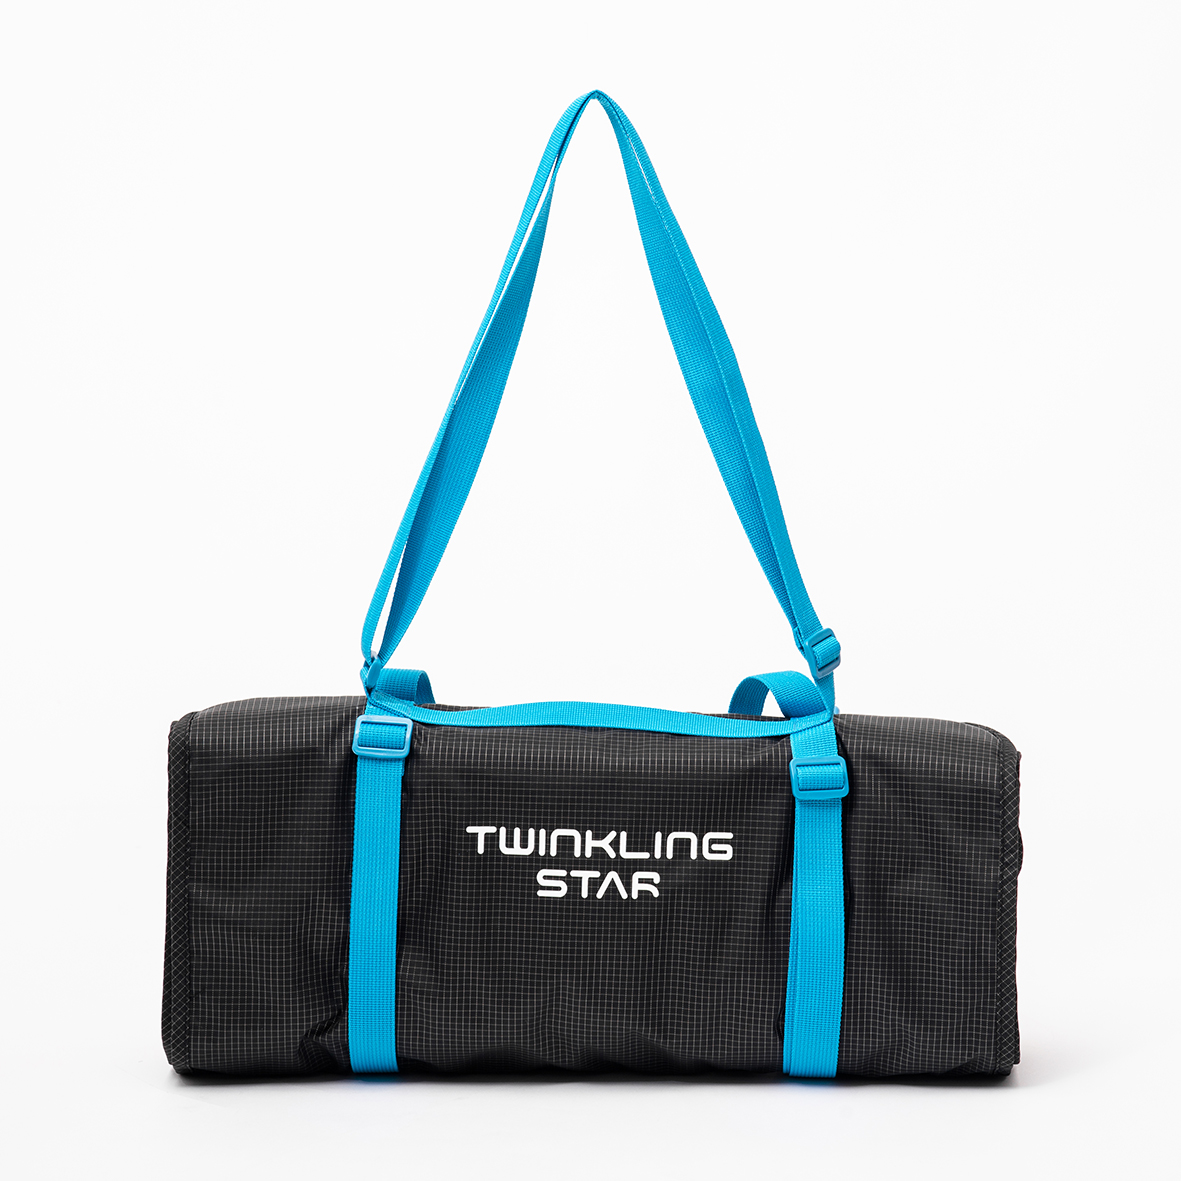 Best-Selling Multicolor Gym Sports Bag Women - New design portable and stylish multi-compartment with large capacity rolled up travel bag large size – Twinkling Star